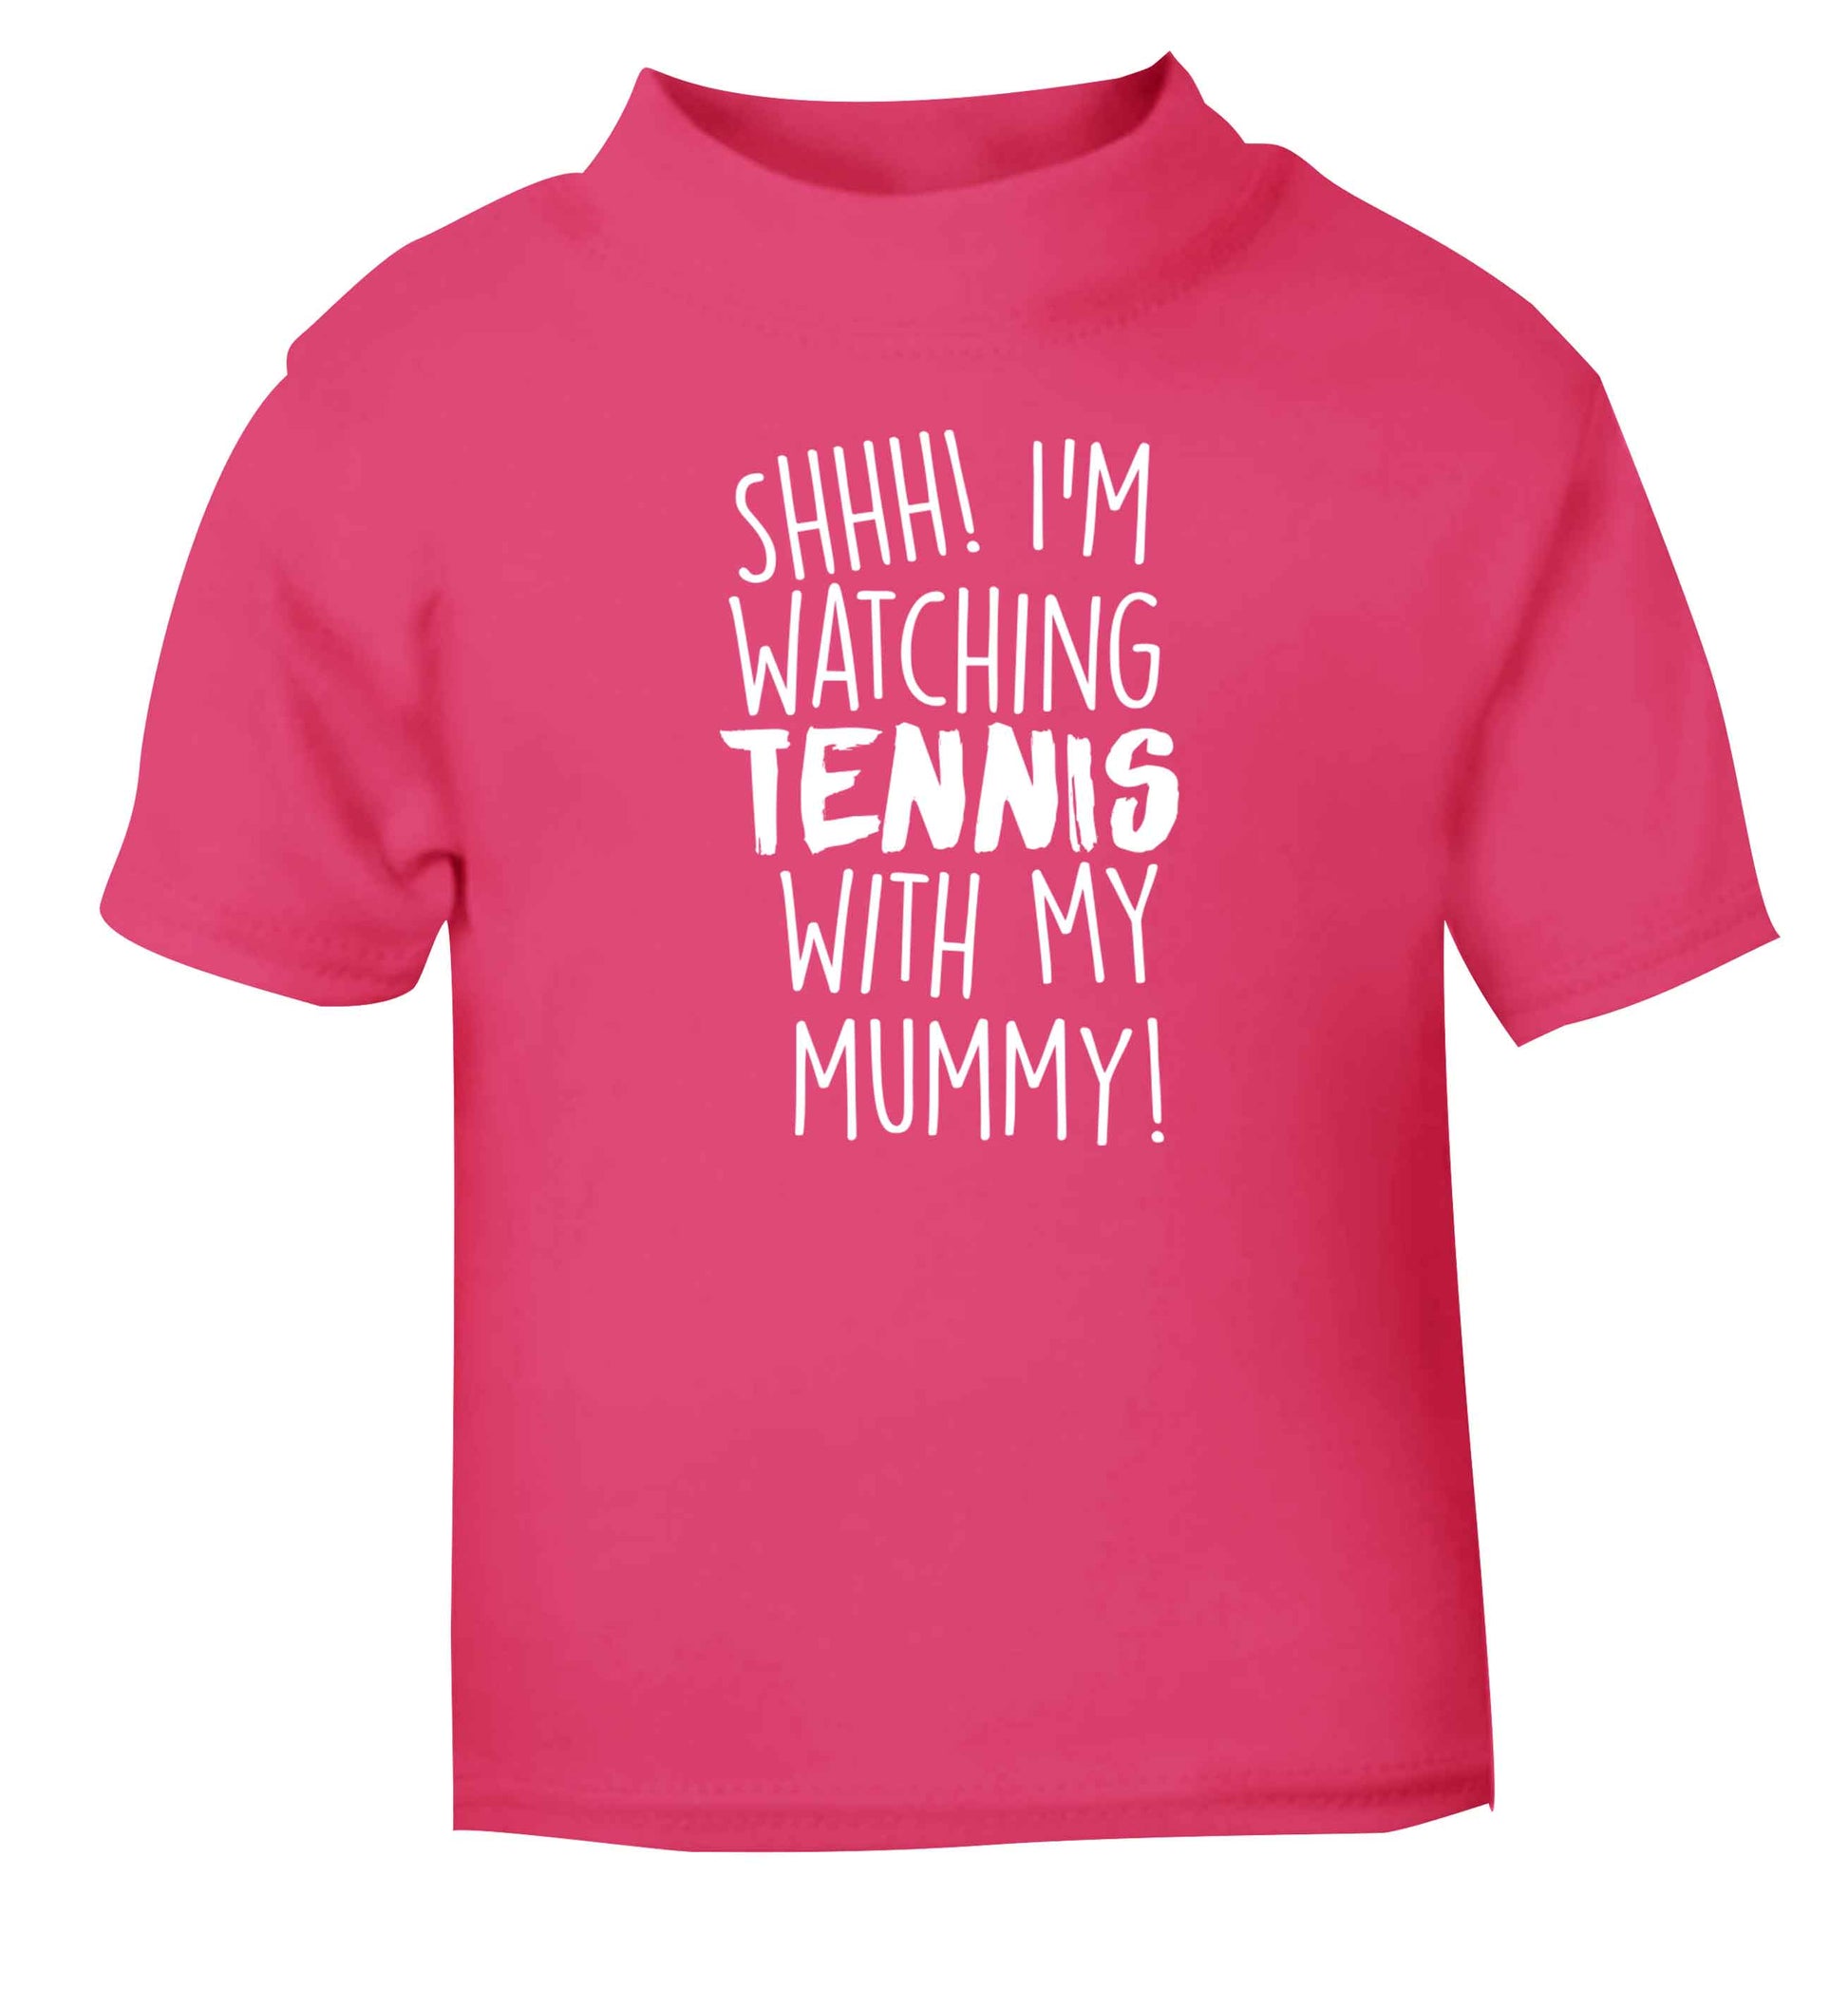 Shh! I'm watching tennis with my mummy! pink Baby Toddler Tshirt 2 Years